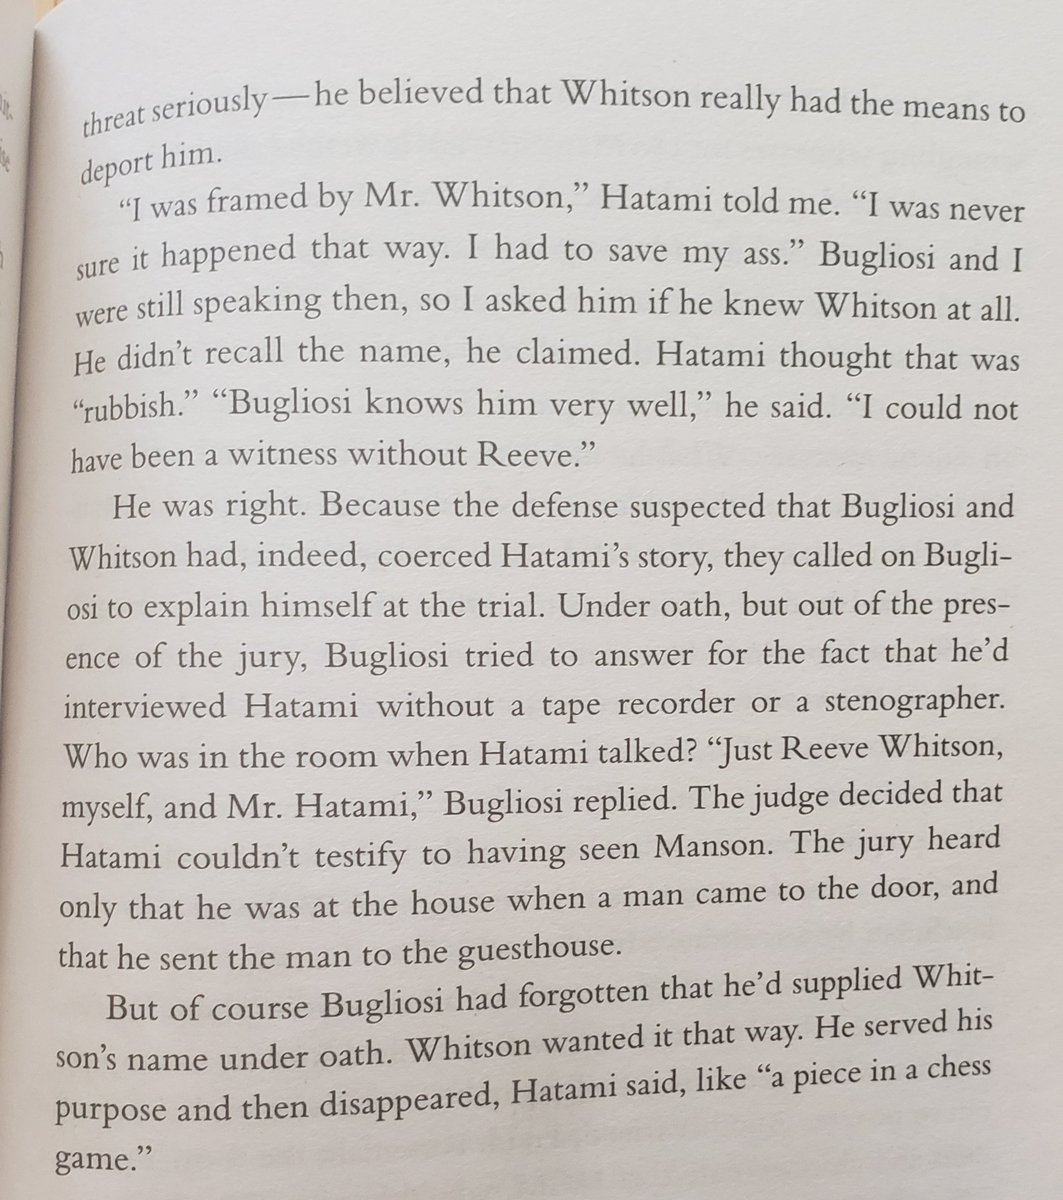 Whitson went on to pressure Hatami to testify that he'd seen Manson at the house four months prior to the murders- thus linking Manson to the scene and to the victims. Hatami knew this was untrue, but was threatened with deportation if he didn't comply. So he did: